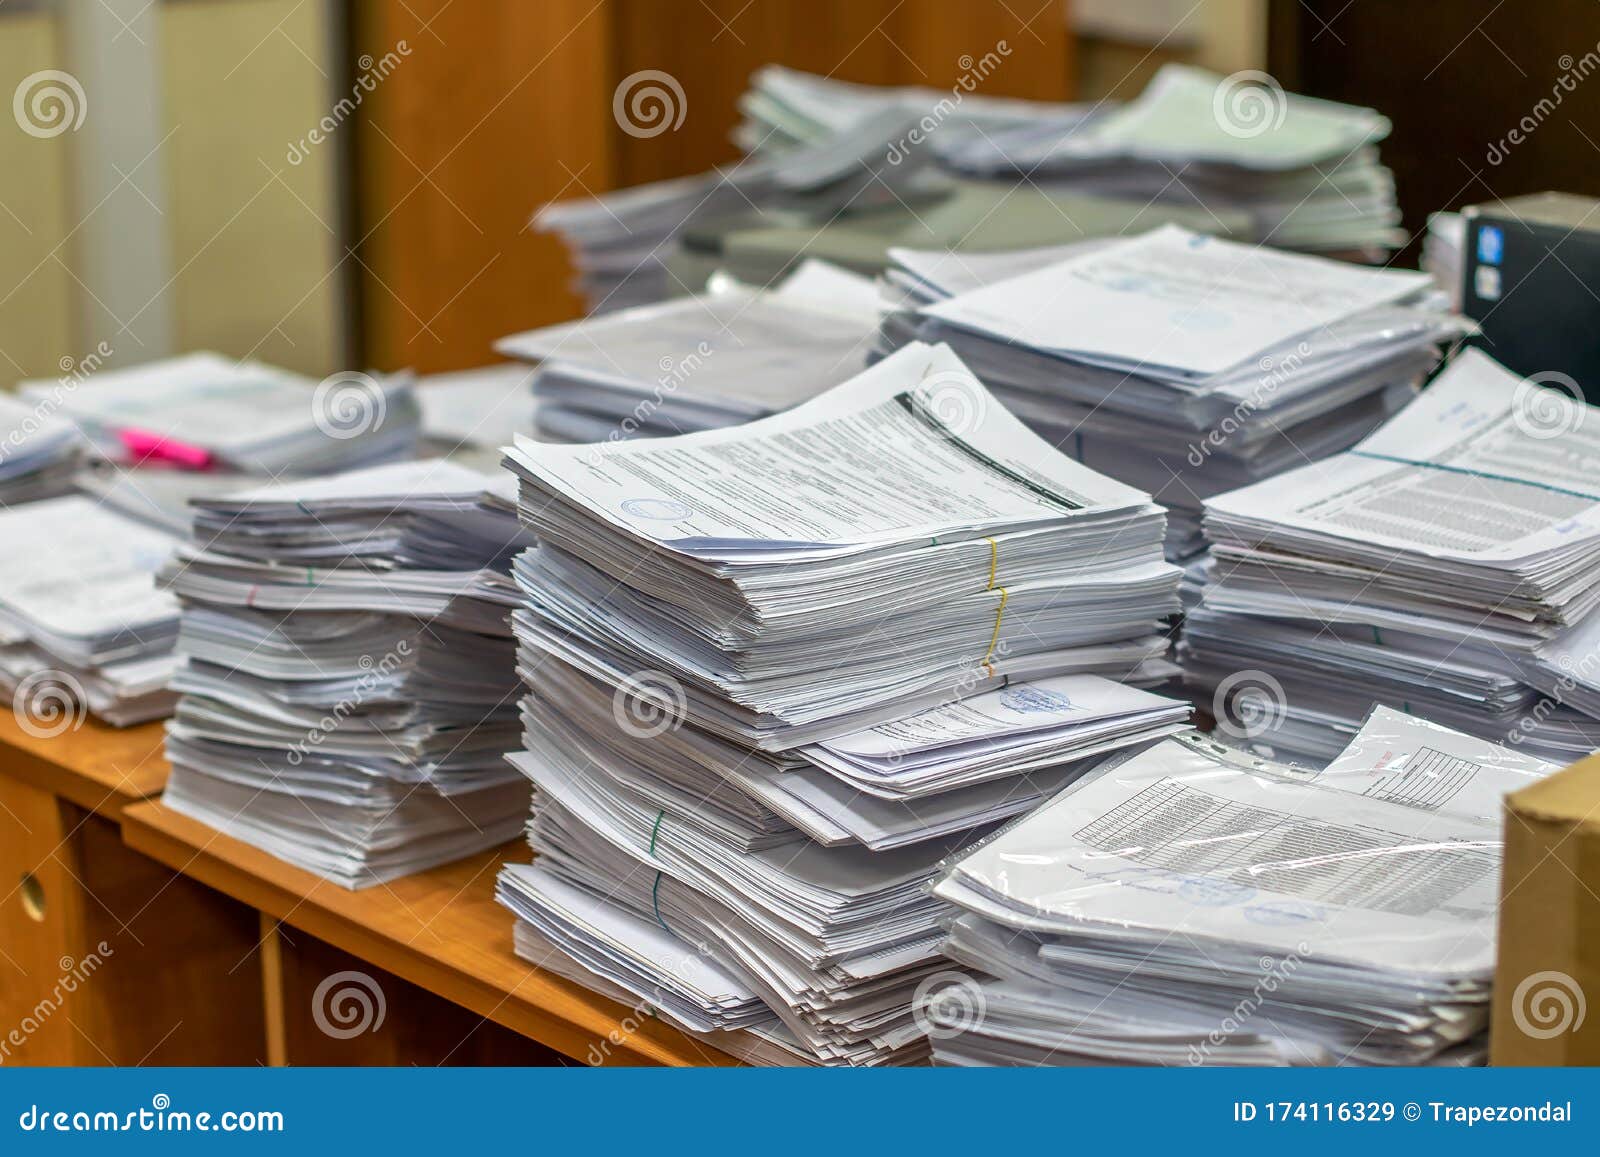 Premium Photo  Pile of a paper on office desk stacked.